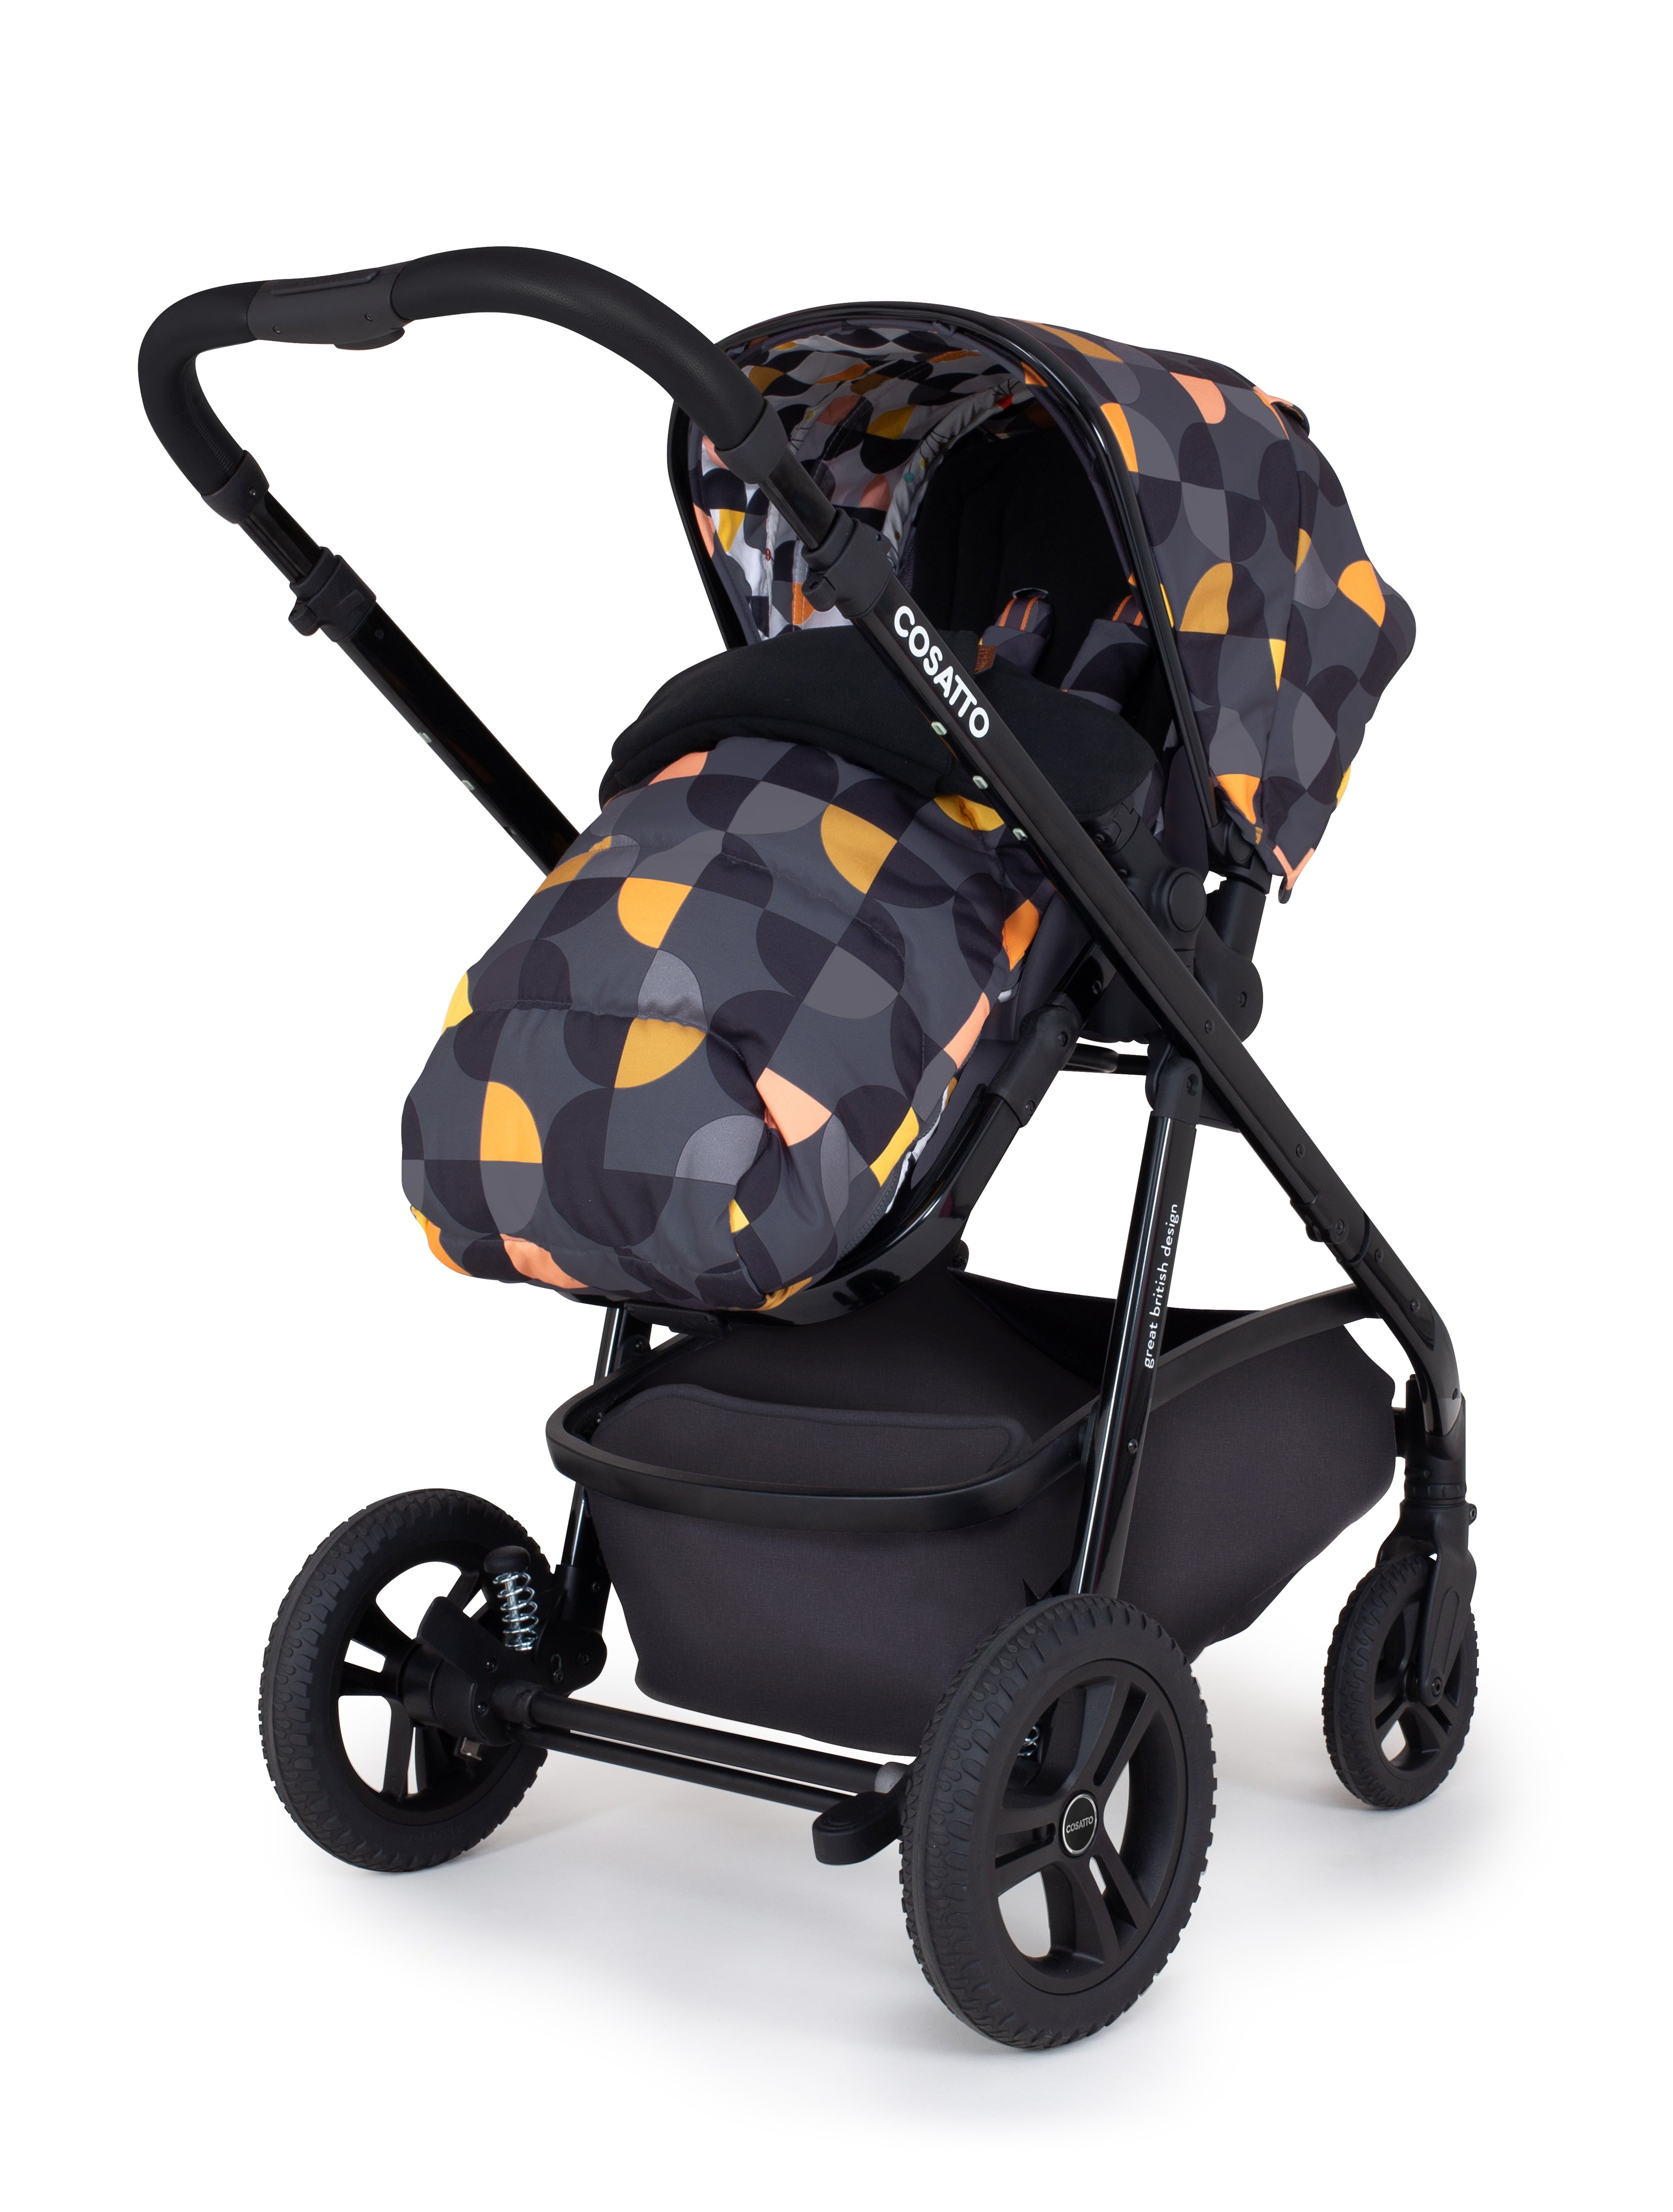 Wow Continental Pushchair Debut